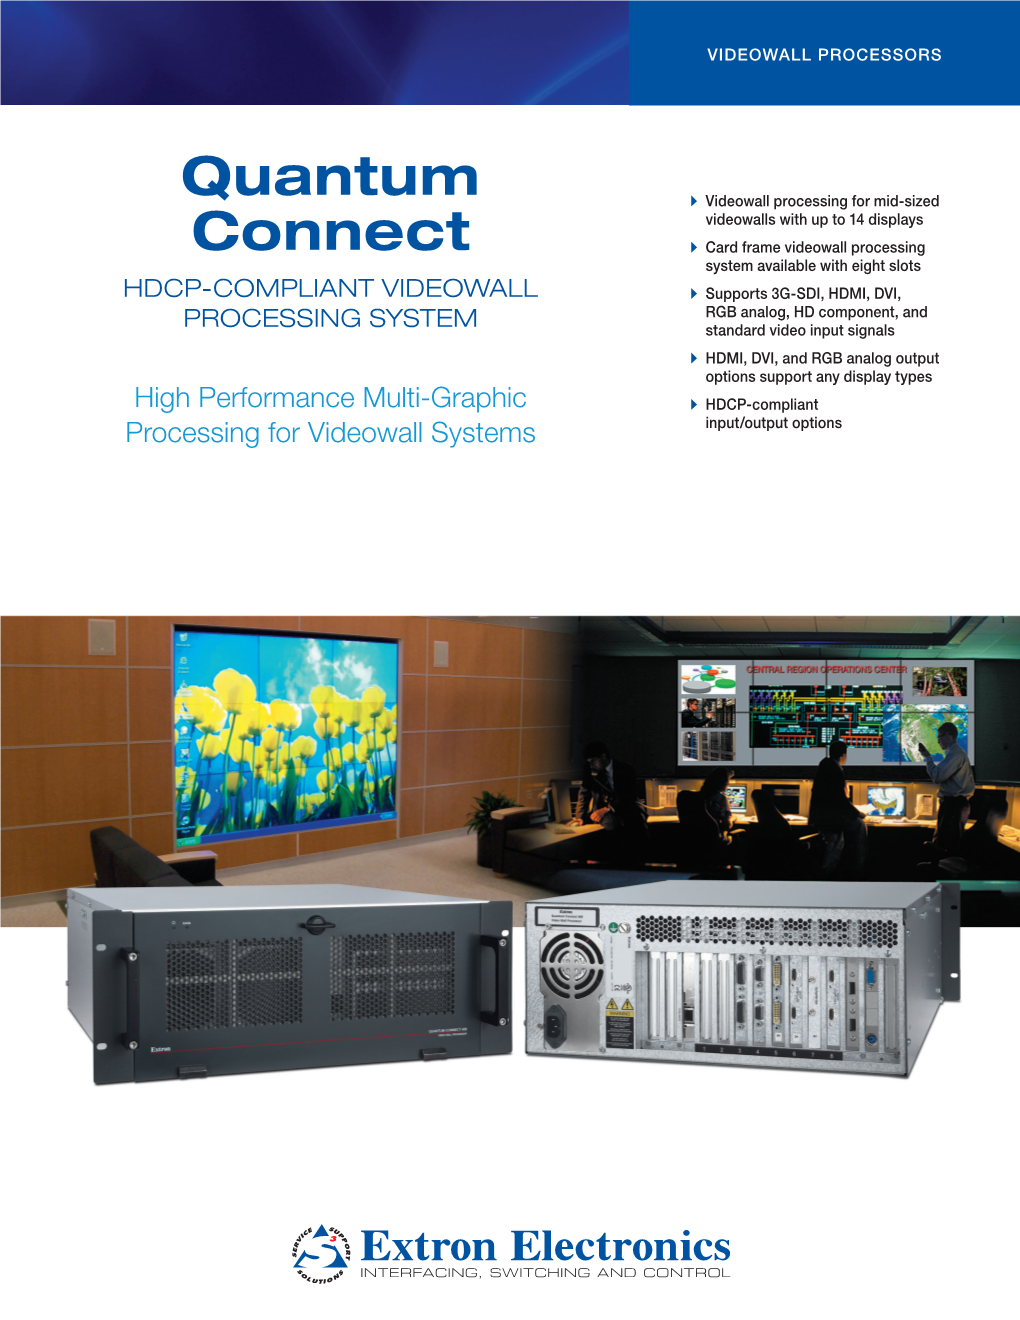 Quantum Connect Is Packaged Into Permanent Configurations Supports a Wide Variety of Input, Output, and Windowing Capabilities When Shipped from the Factory